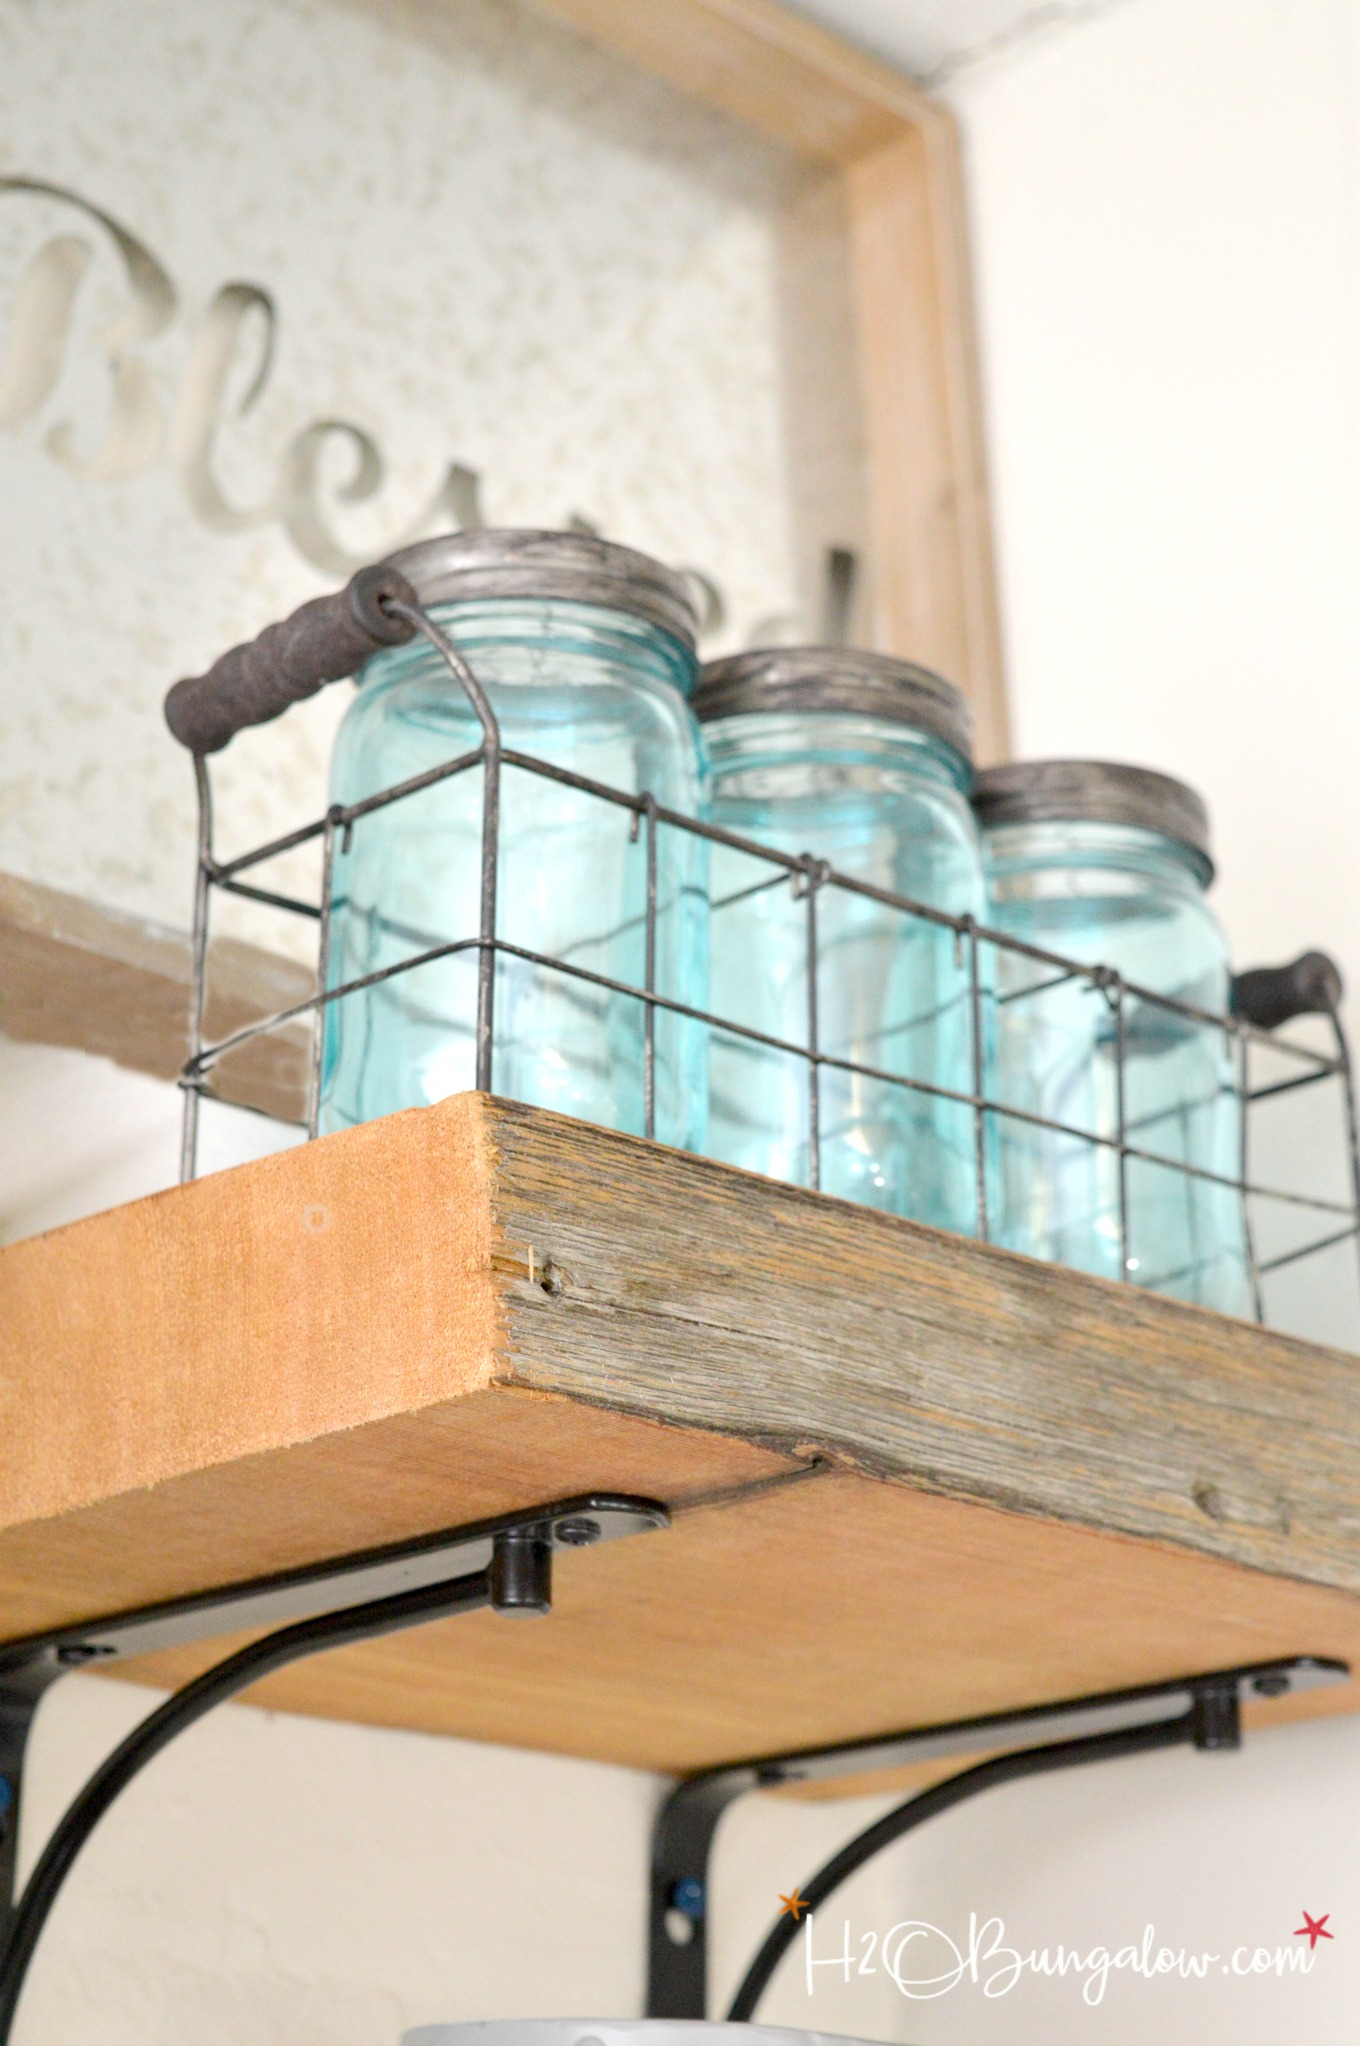 DIY reclaimed wood kitchen shelves made from wood scraps add character and texture to a modern farmhouse. Simple tips for an upscale DIY kitchen project 